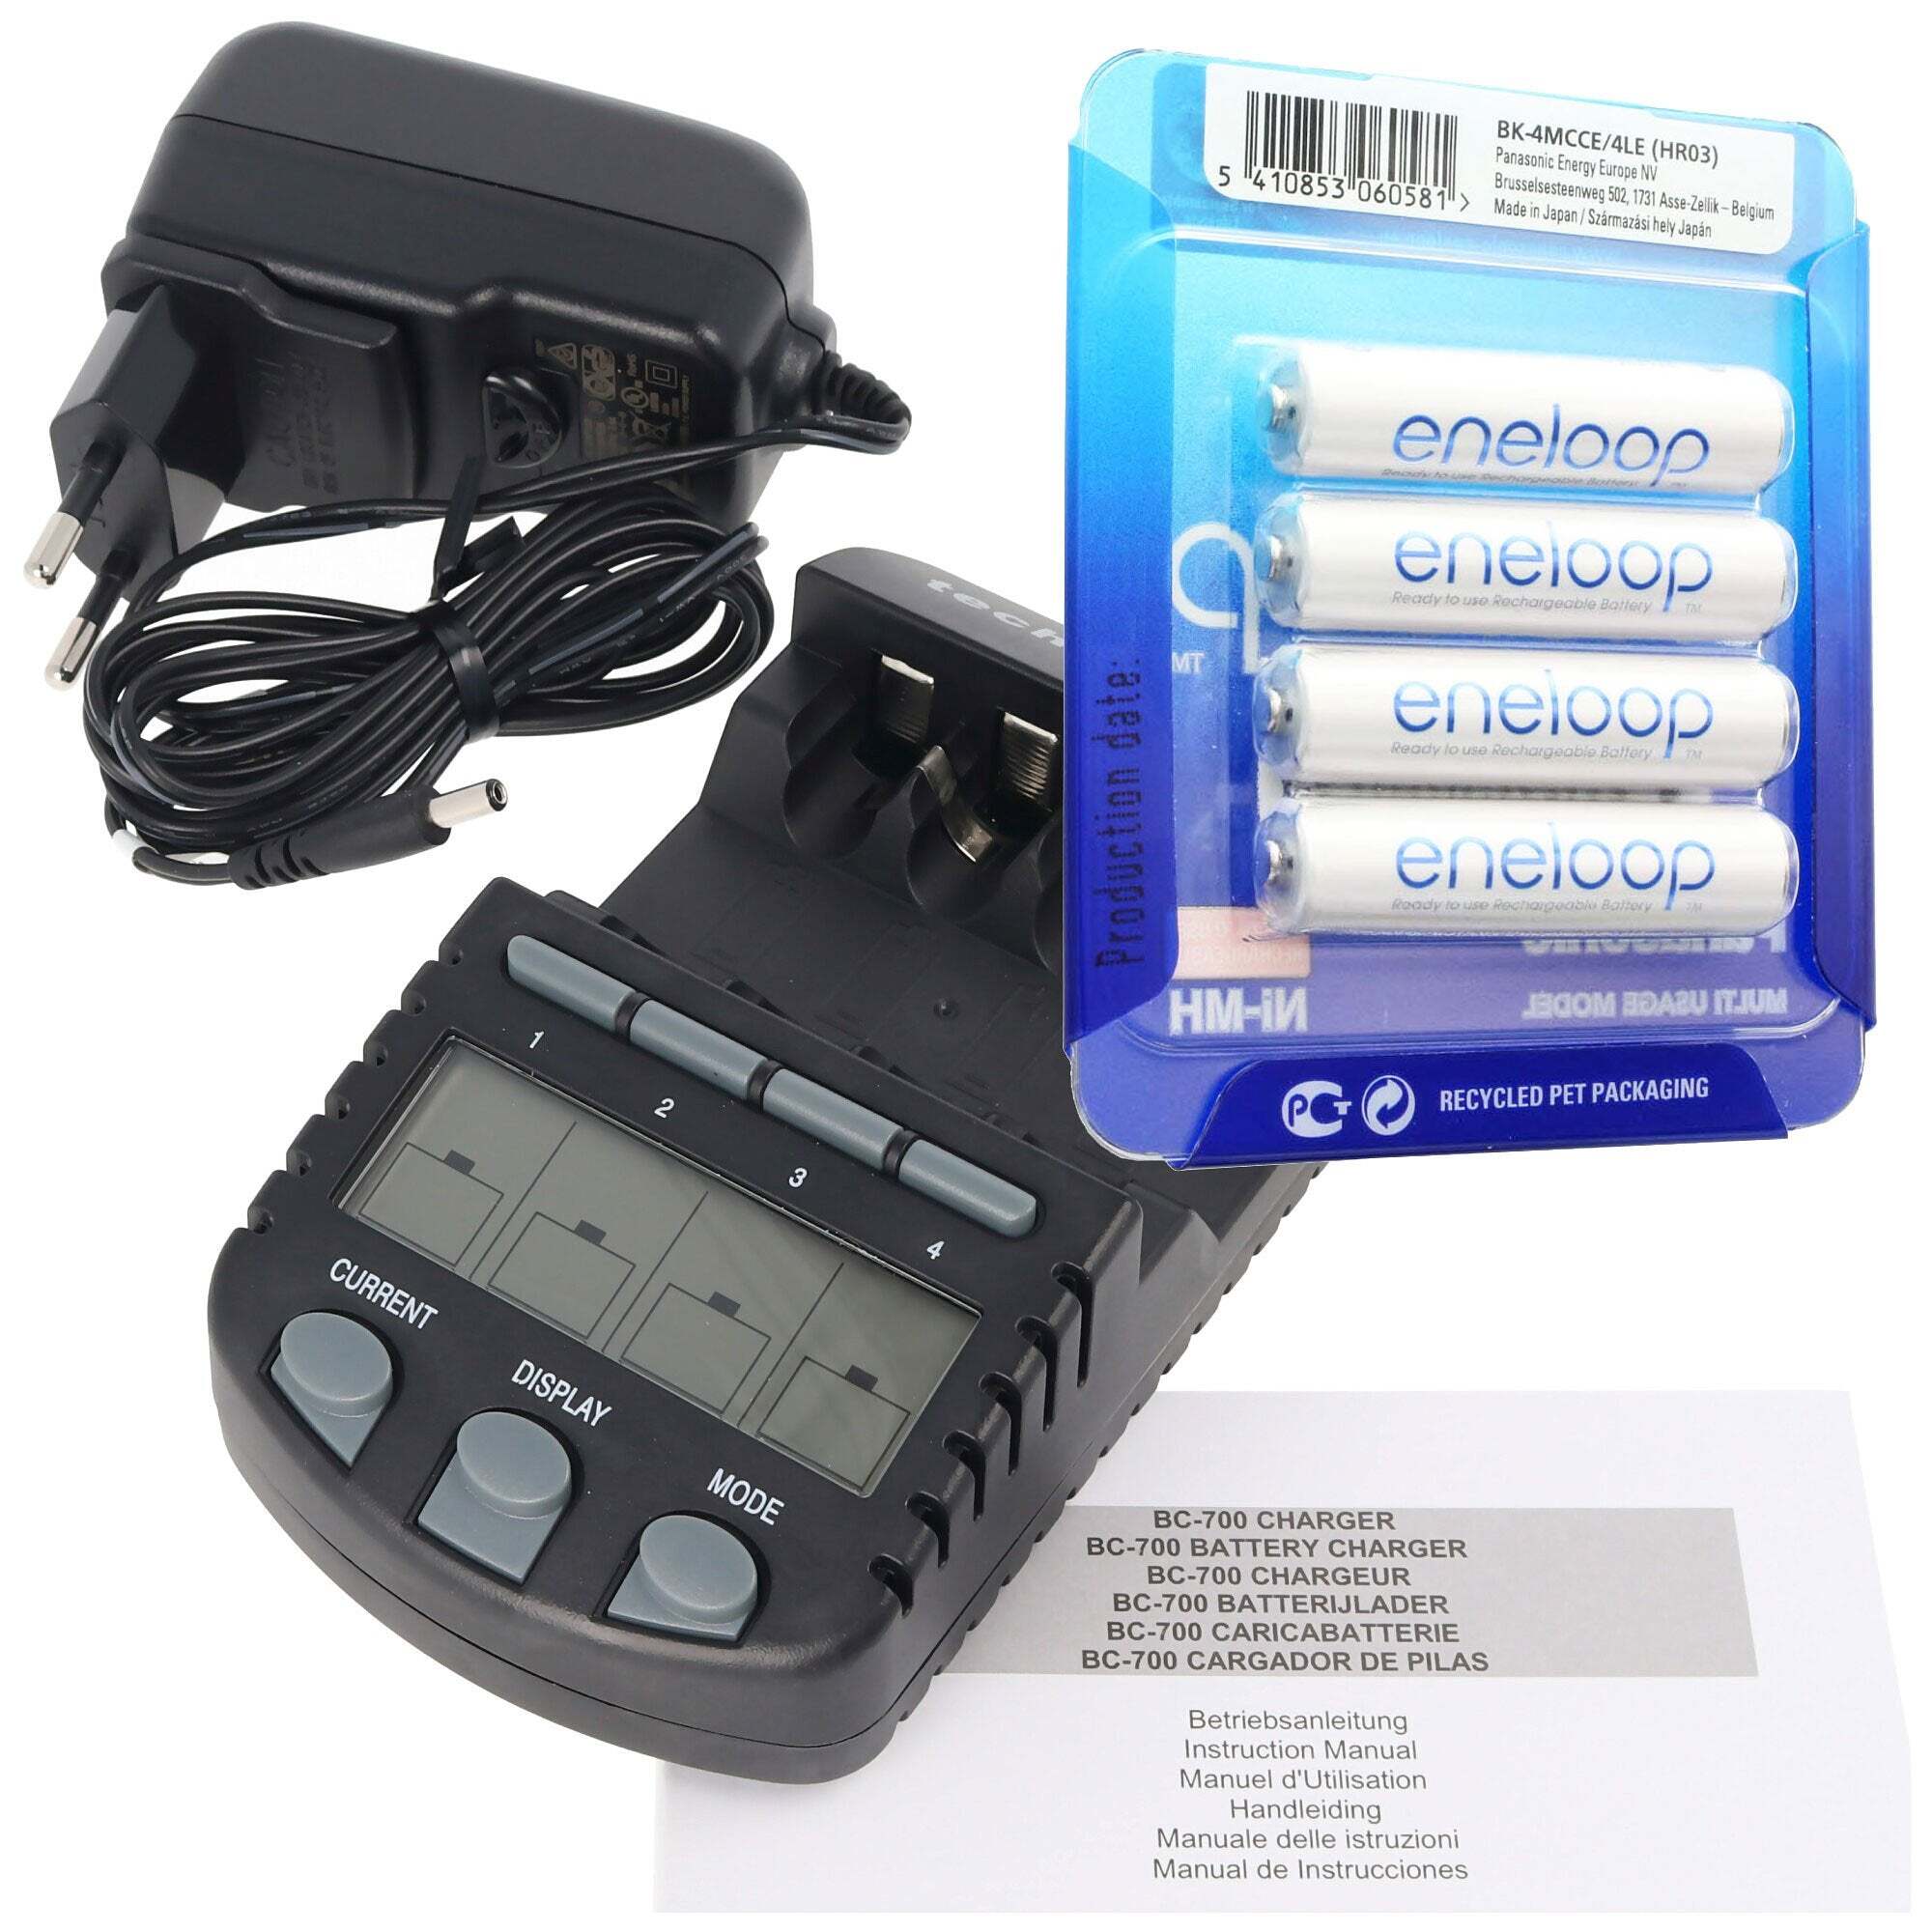 ACCUCELL eneloop Mignon HR-3UTGA-4BP-CASE 2x en 1 AccuCell LCD-oplader